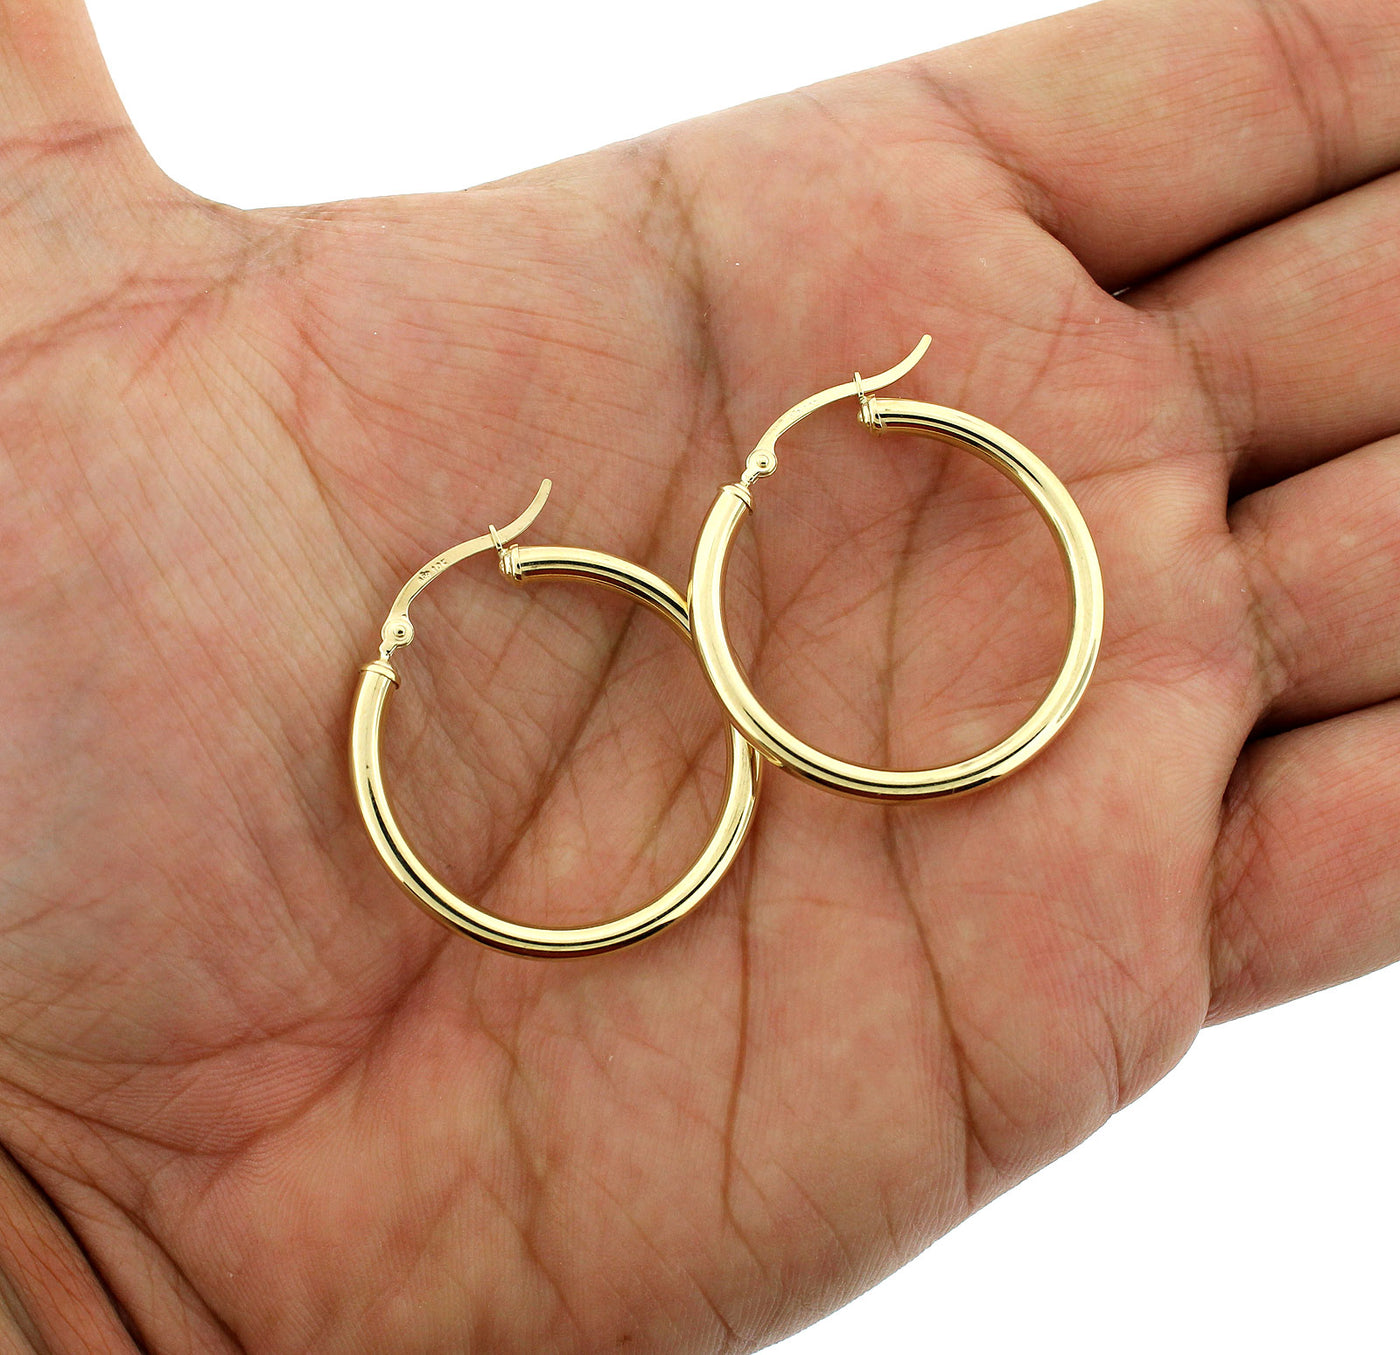 Real 10K Solid Yellow Gold 3mm X 32mm 1.25" Plain Shiny Round Tube Hoop Earrings